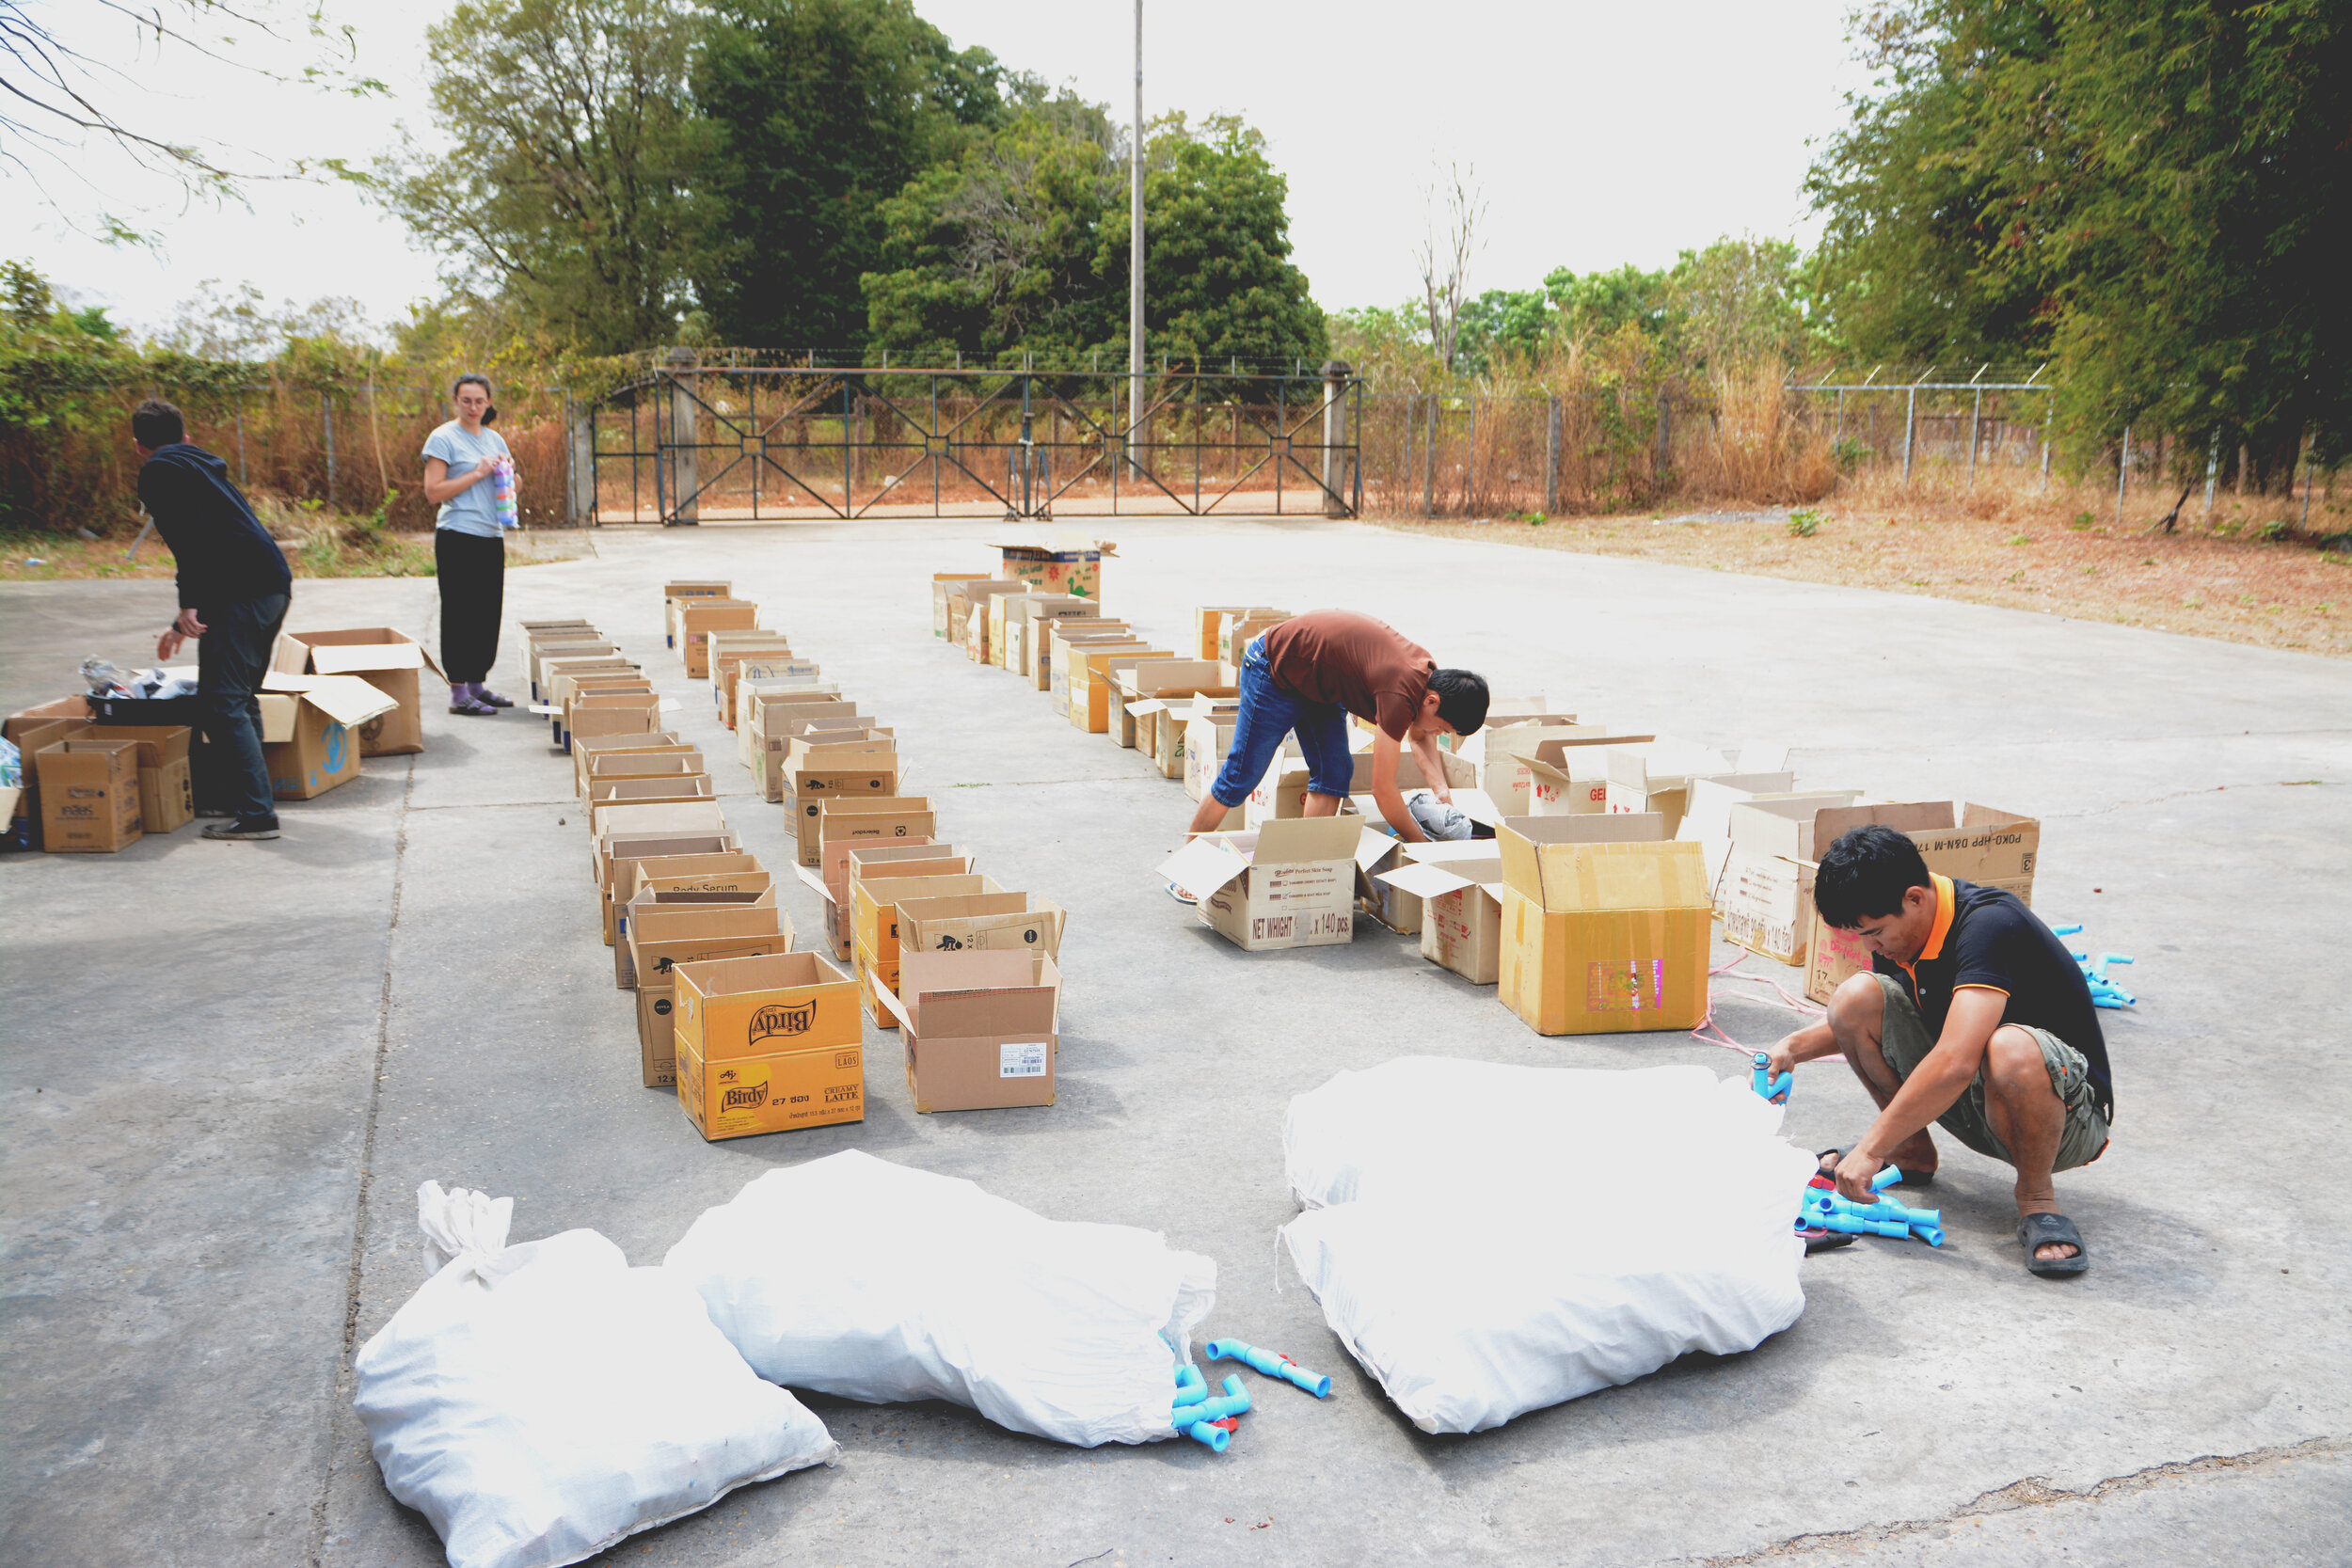   Preparation of cardboard boxes  